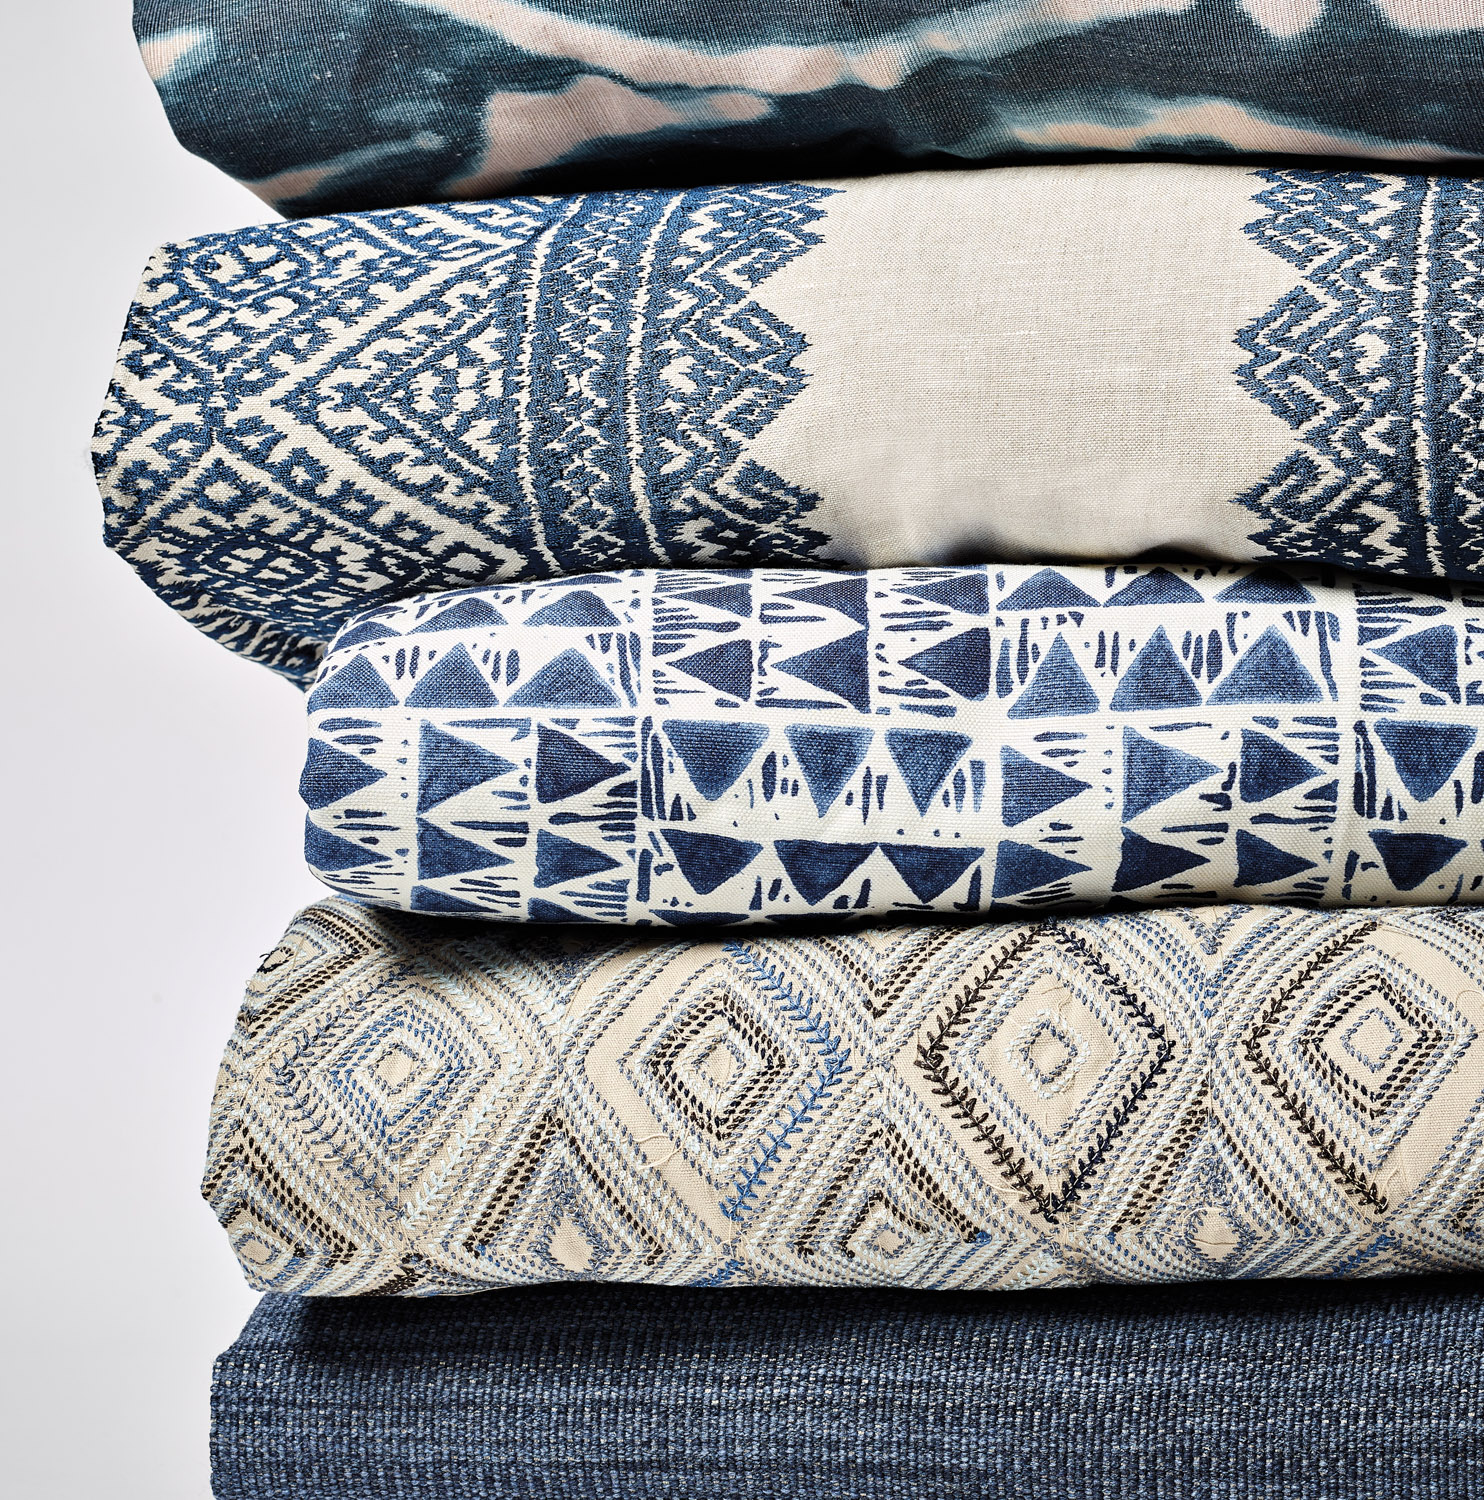 Pile of folded textiles with varying geometric patterns in blue and white shades from Lee Jofa's Breckenridge collection for Kravet.